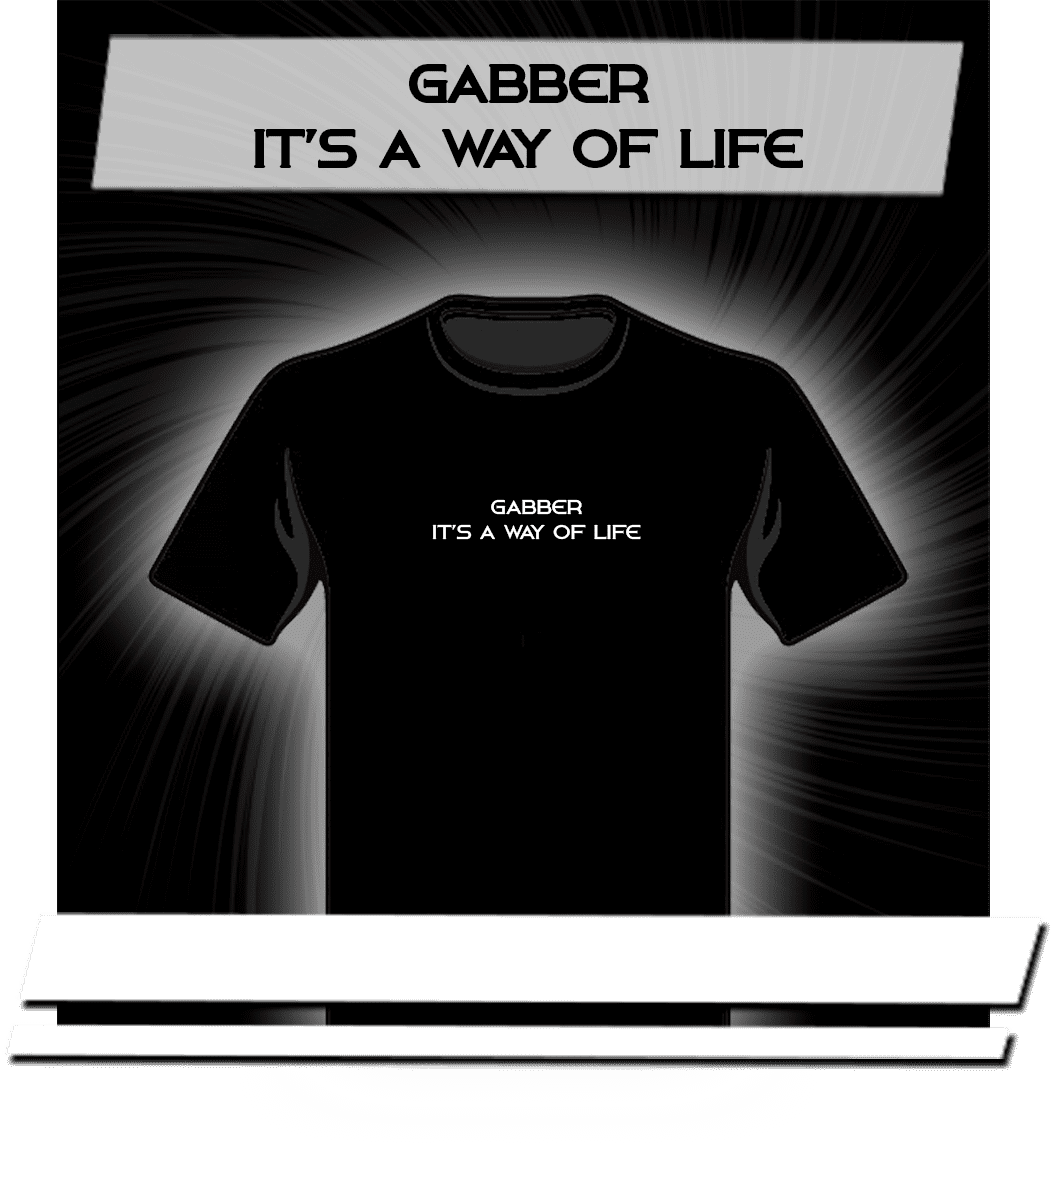 Gabber it's a way of life